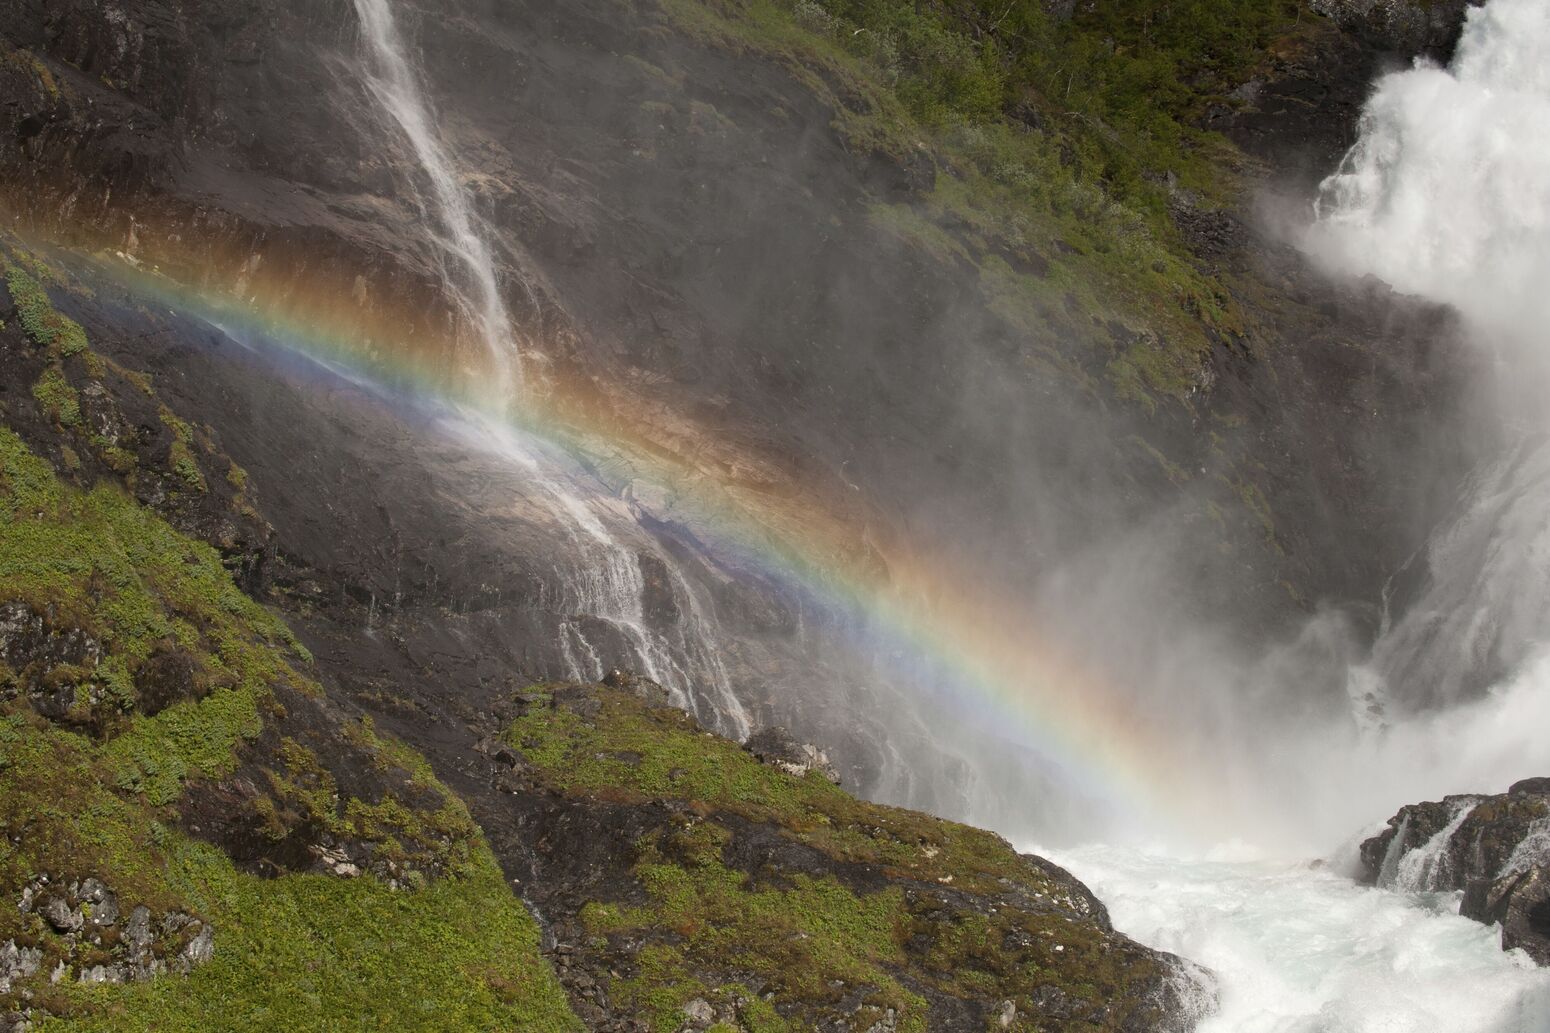 Destination, excursion, outdoor photography, Northern Europe, Norway, Flaam, Flamsbana, rainbow, fall